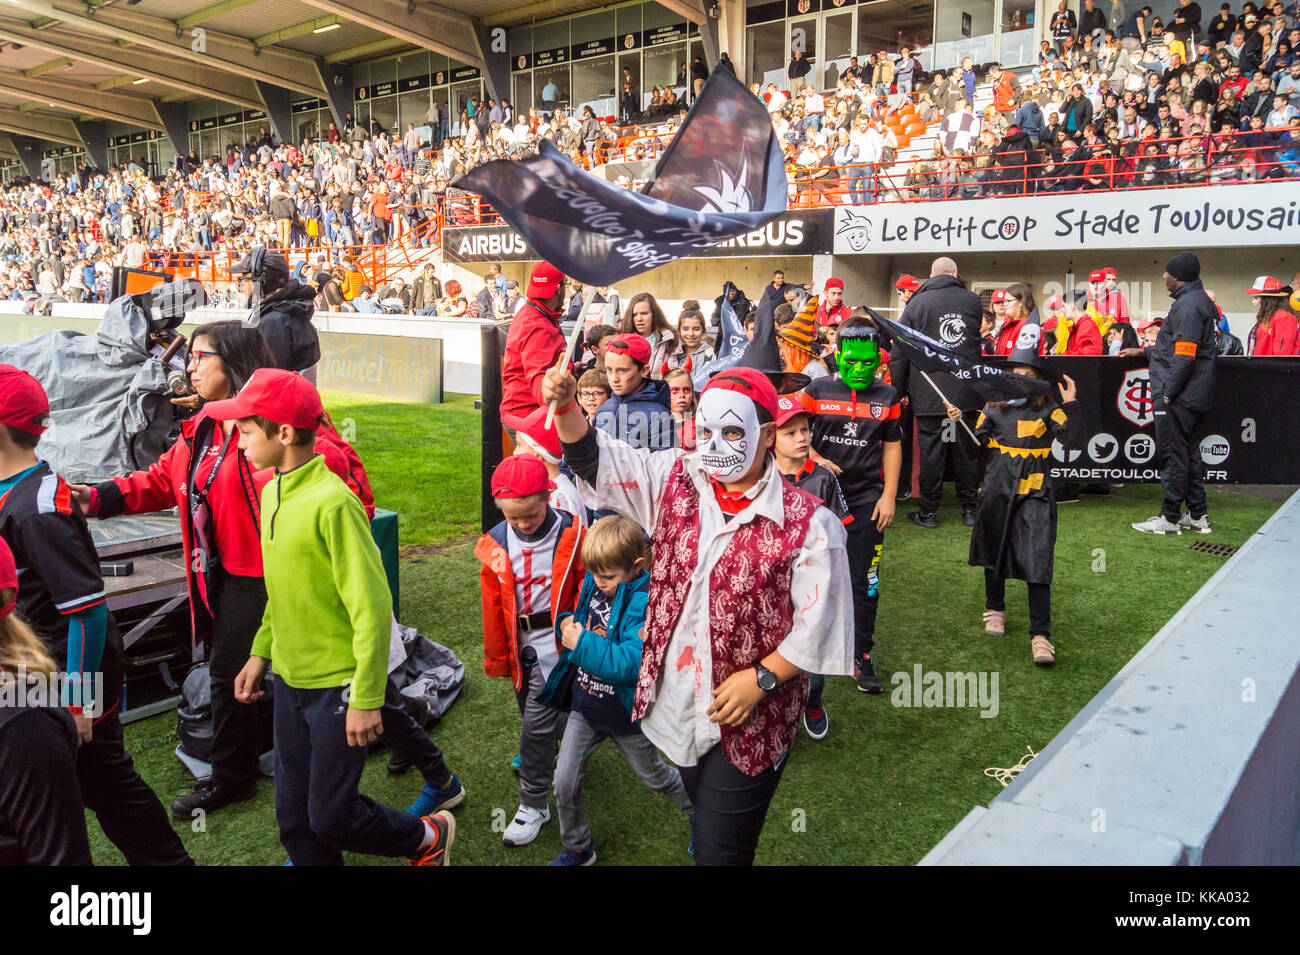 Junior supporters at Ernest Wallon stadium, home ground of Stade Toulousain rugby union team, Toulouse, Haute-Garonne, Occitanie, France Stock Photo